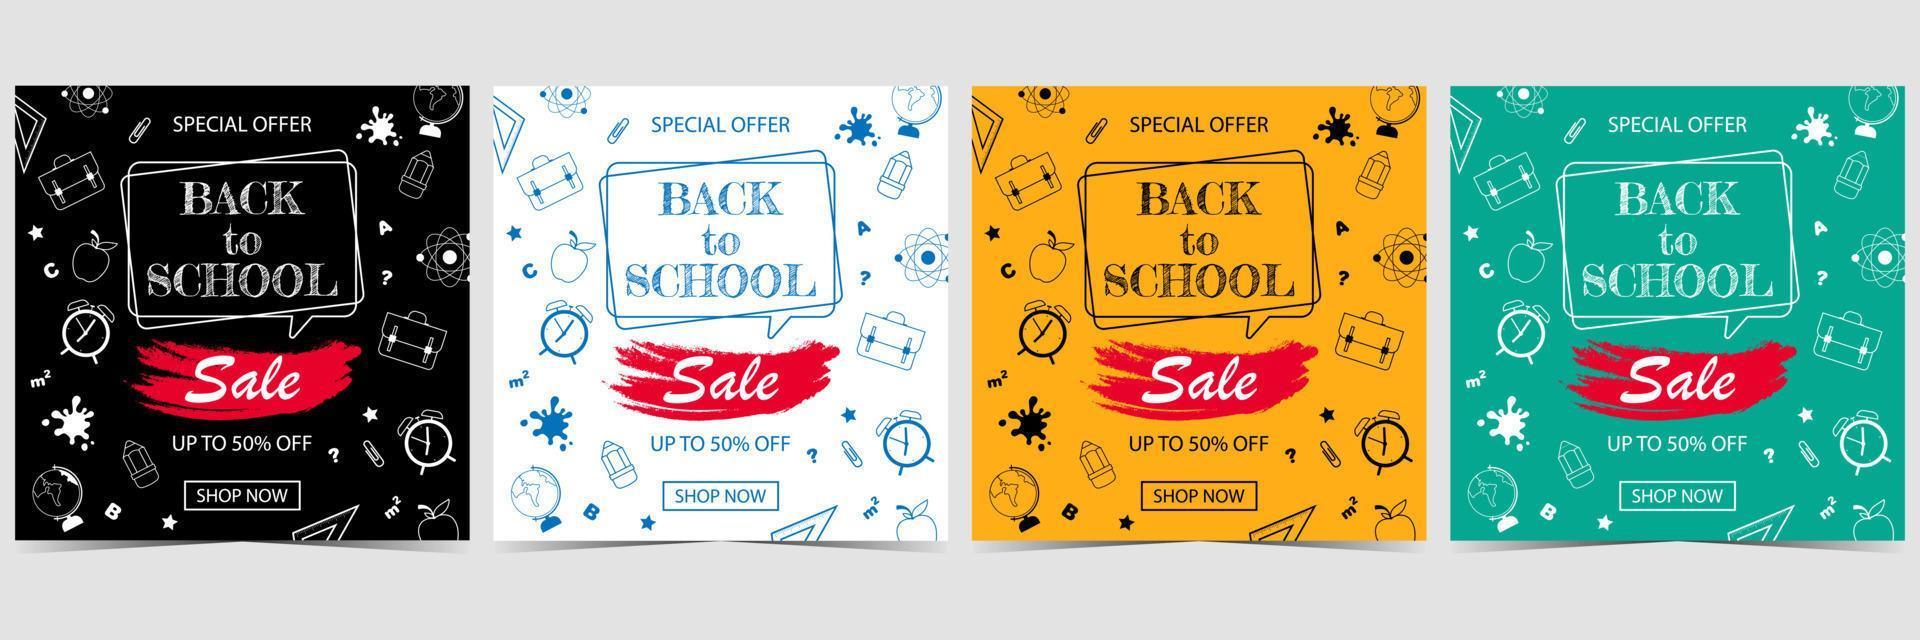 Set of back to school sale banners with black, white, yellow and green background, with school supplies and objects related to education and study process as backpack, pencil, globe, ruler and others. vector